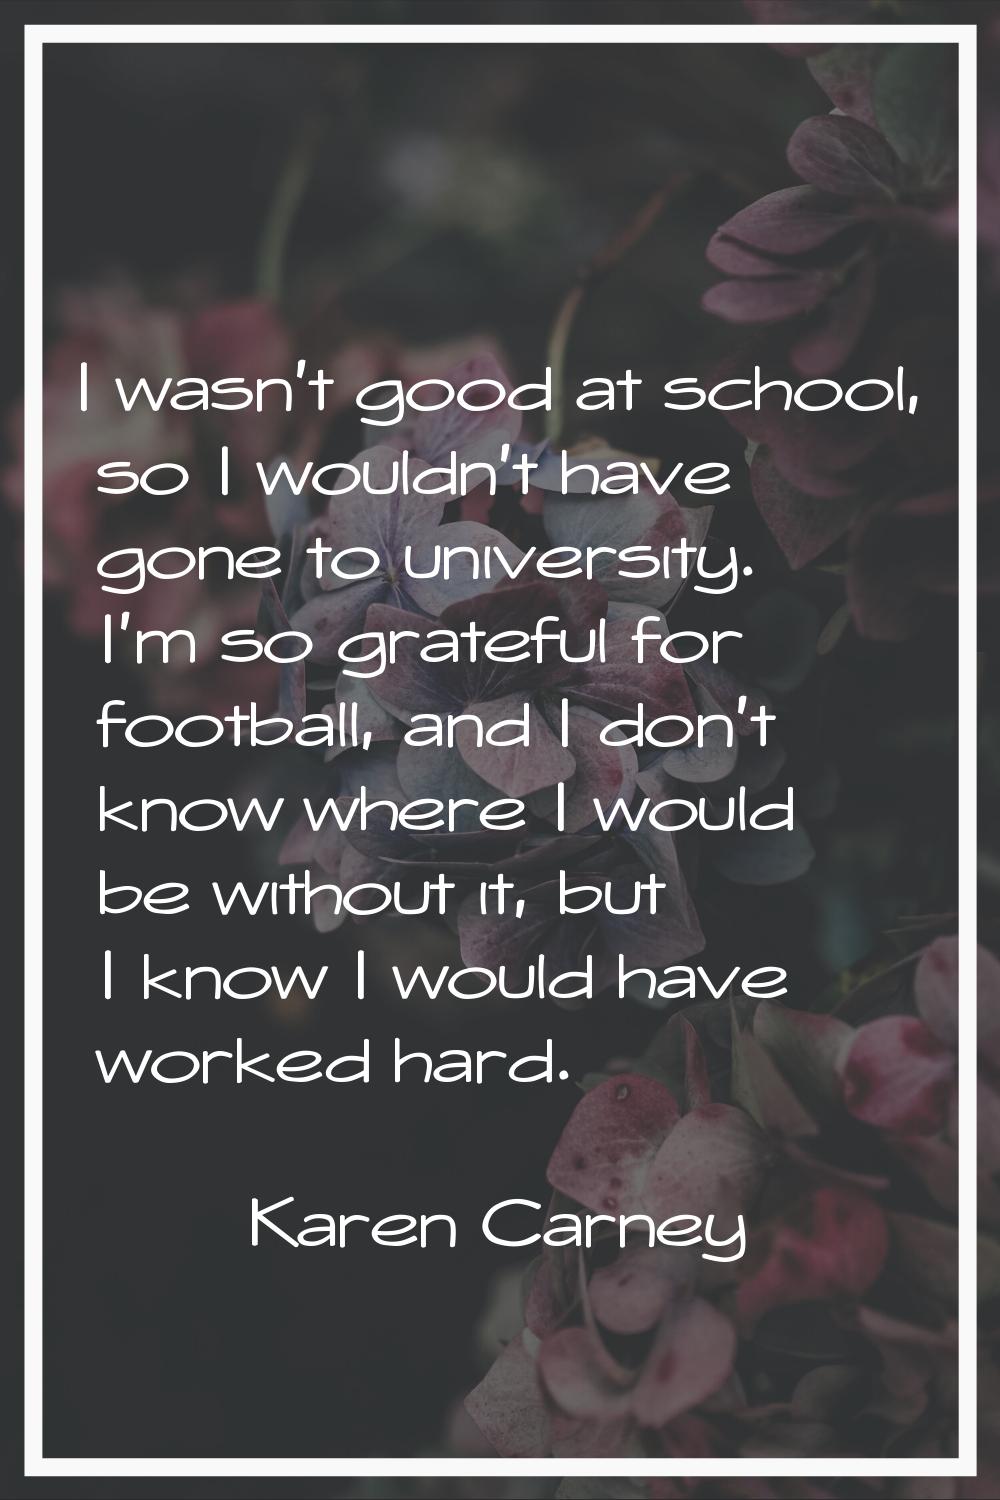 I wasn't good at school, so I wouldn't have gone to university. I'm so grateful for football, and I